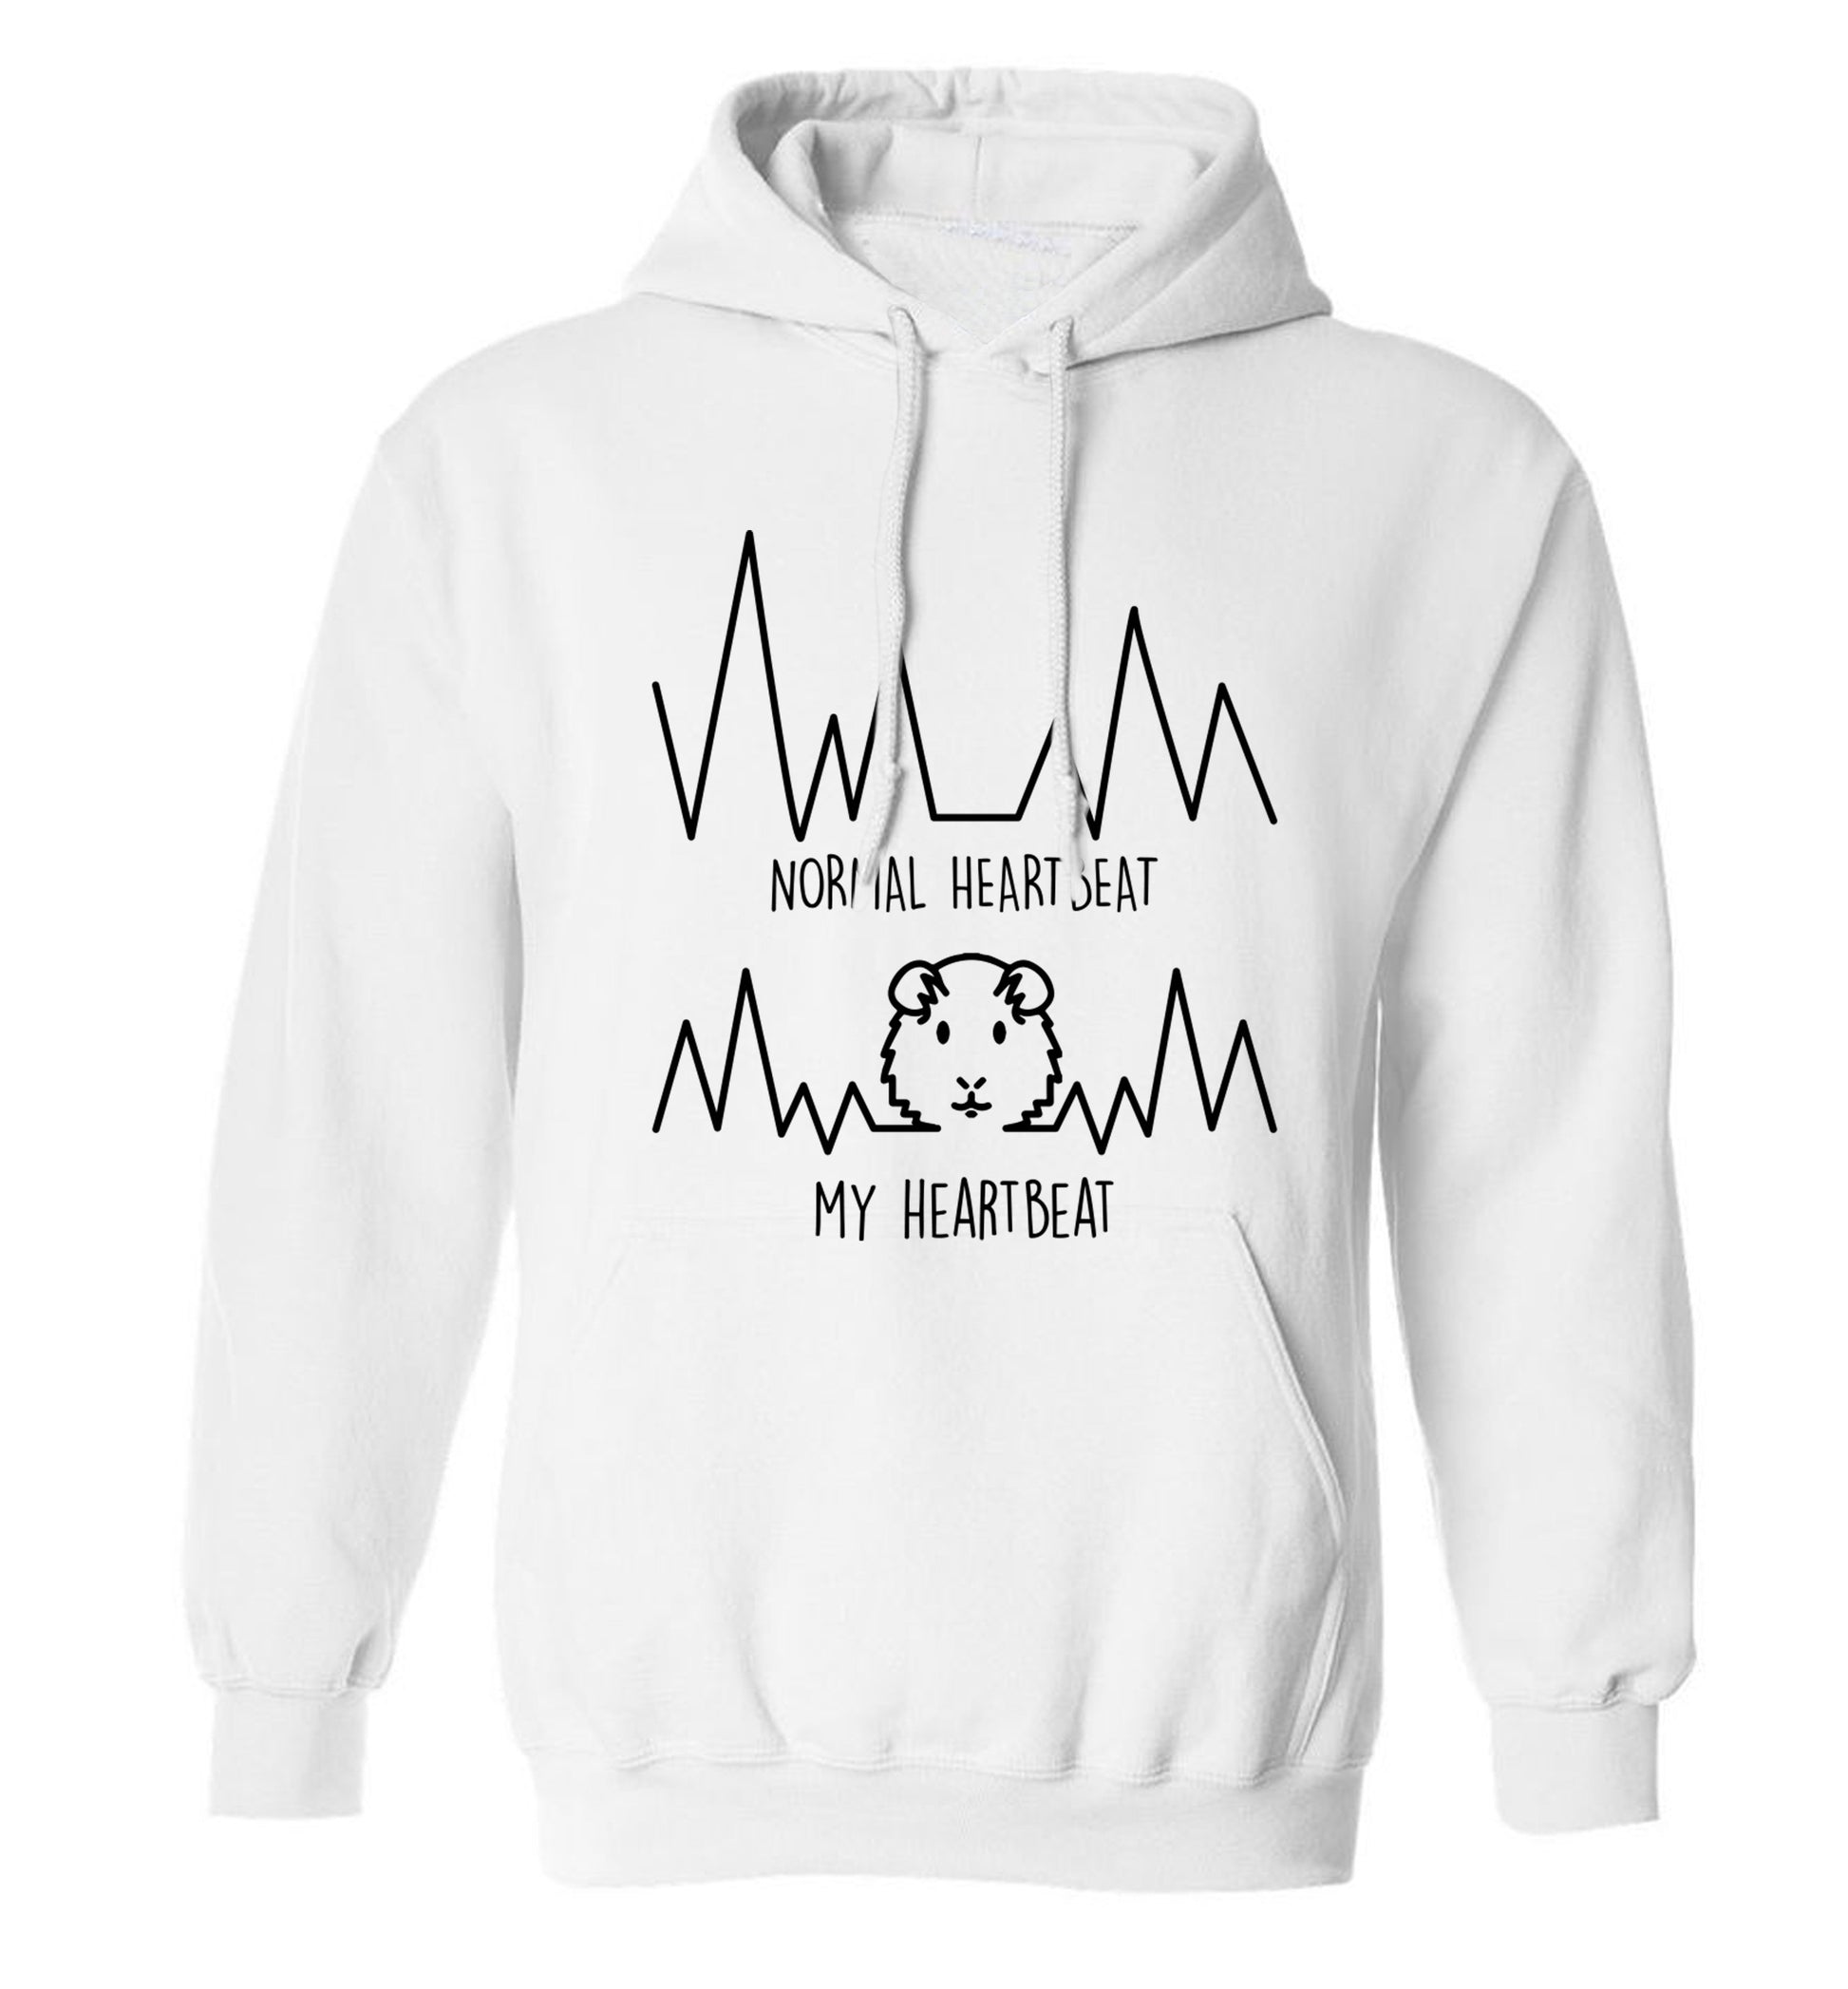 Normal heartbeat vs my heartbeat guinea pig lover adults unisex white hoodie 2XL